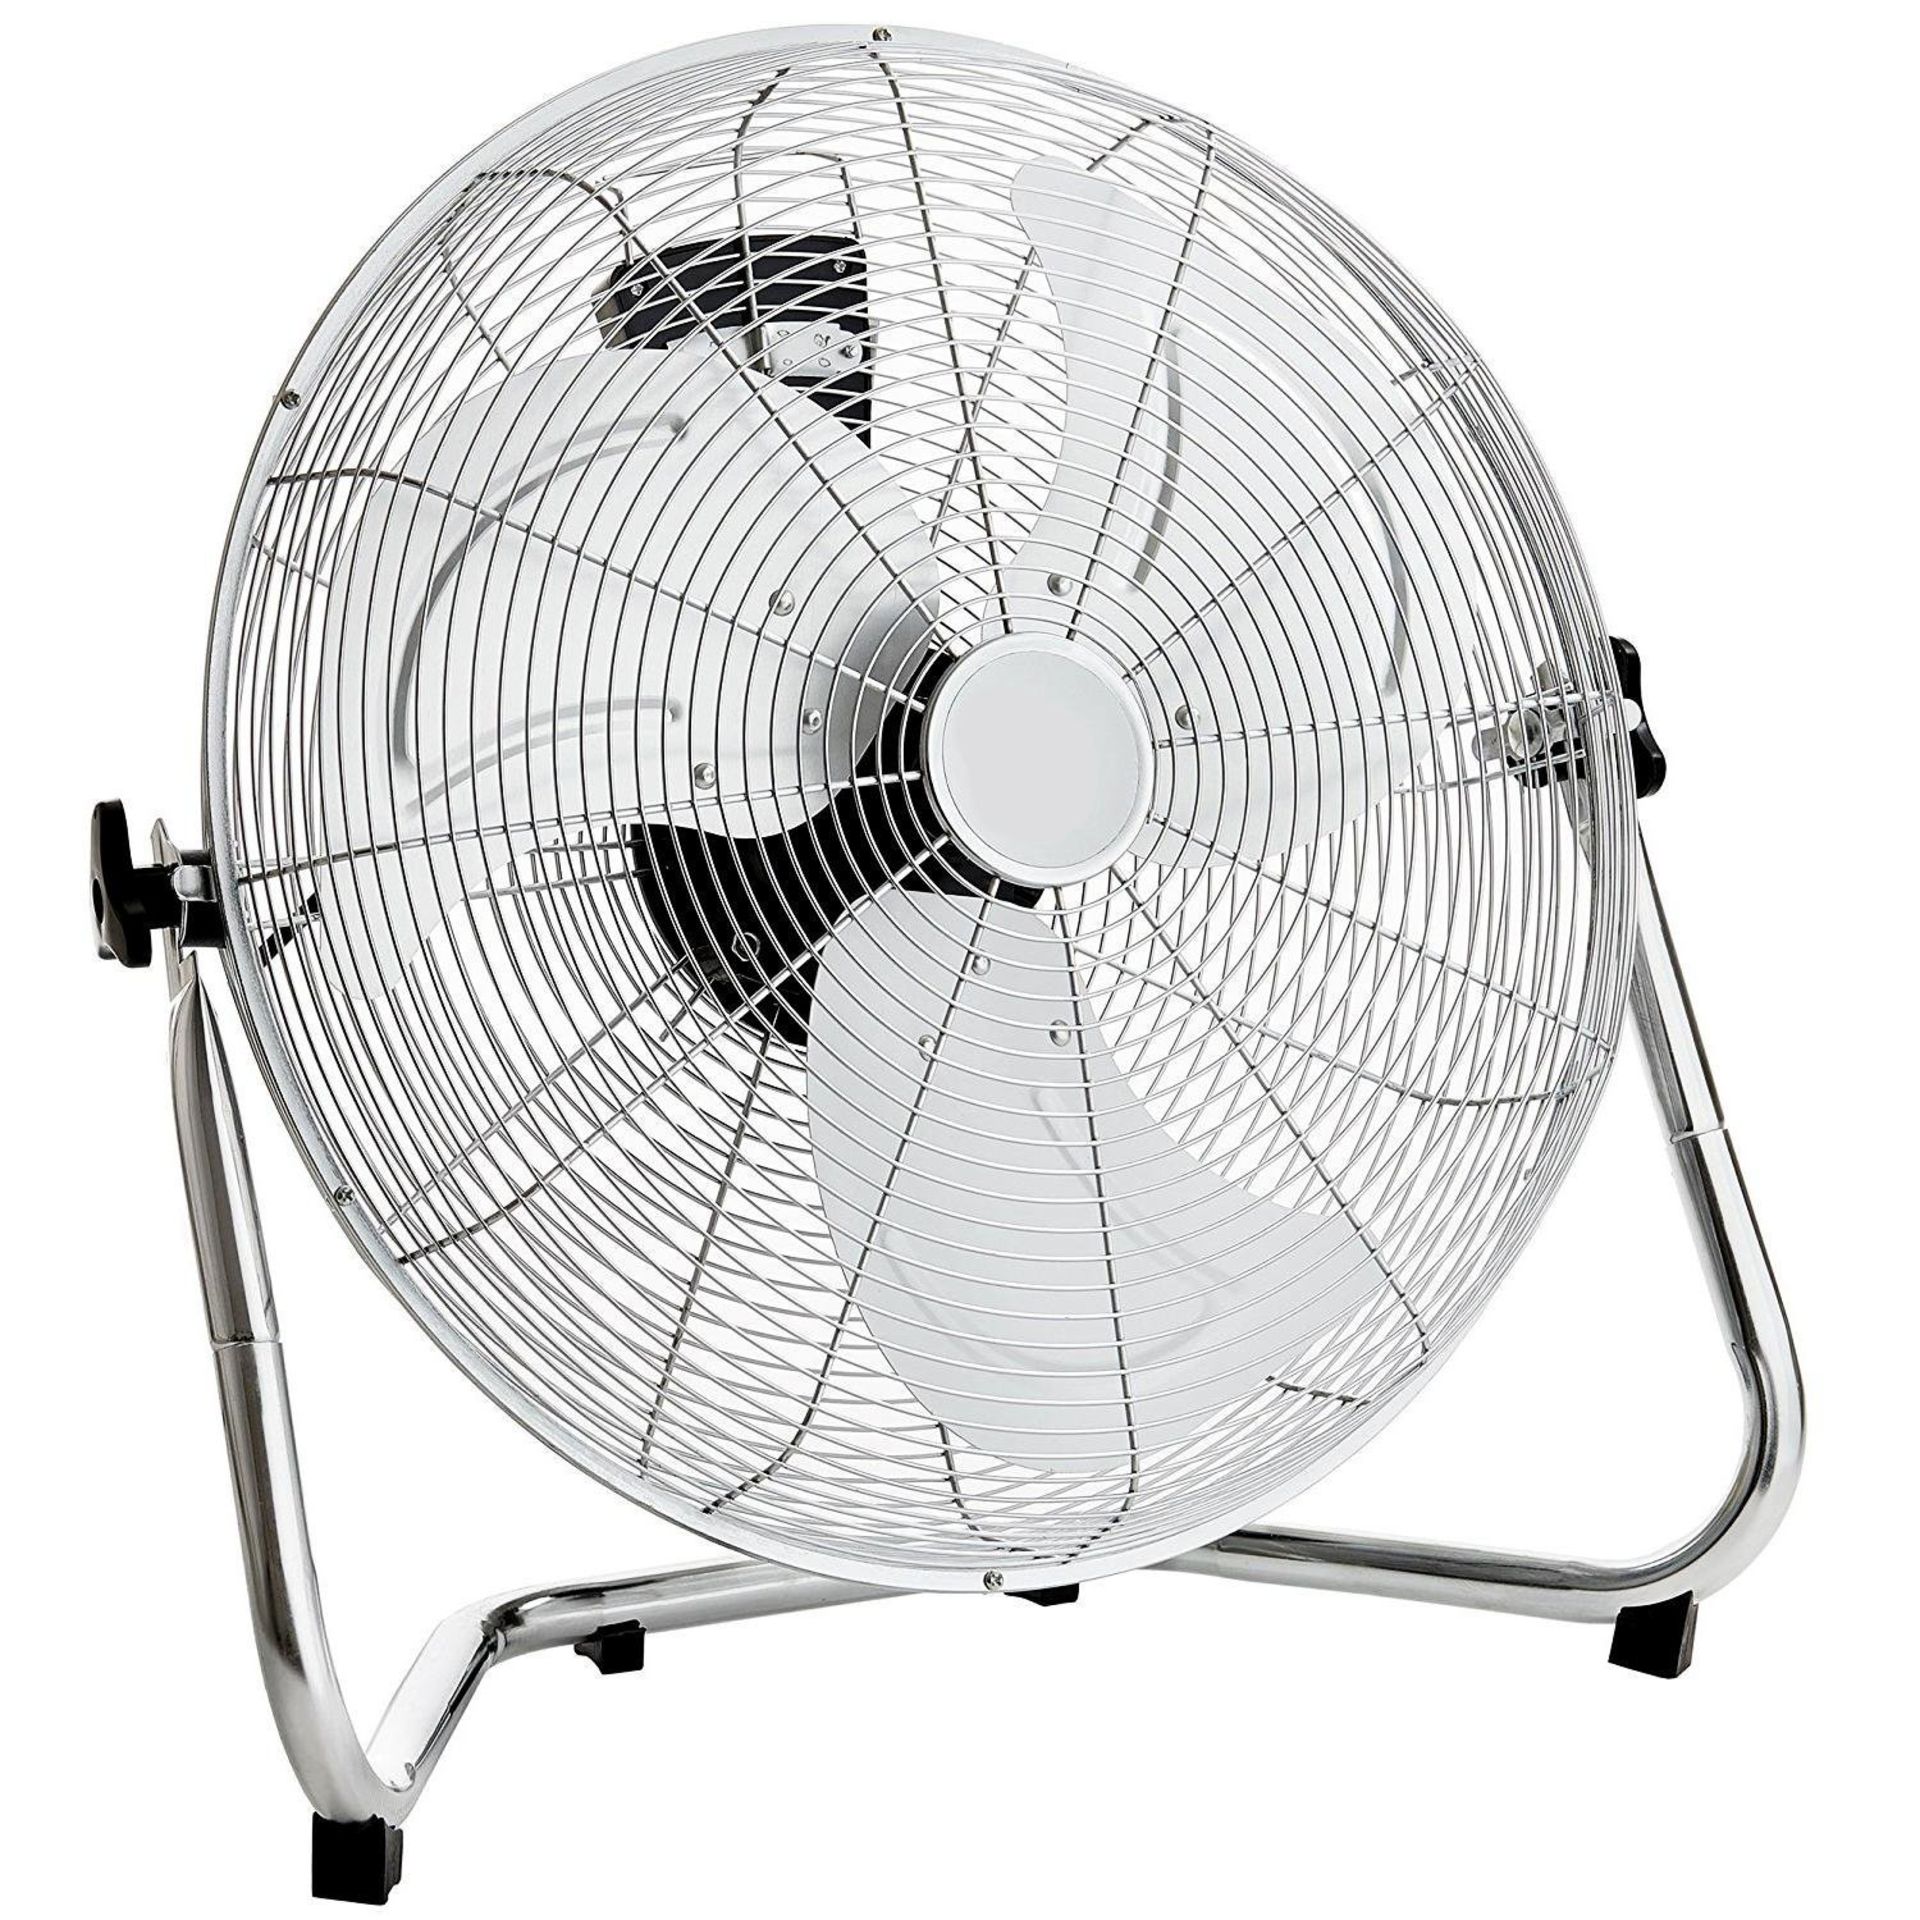 (RU329) 18" Free Standing Chrome Gym Fan Stay cool this year with the 18" gym fan, The fan h...